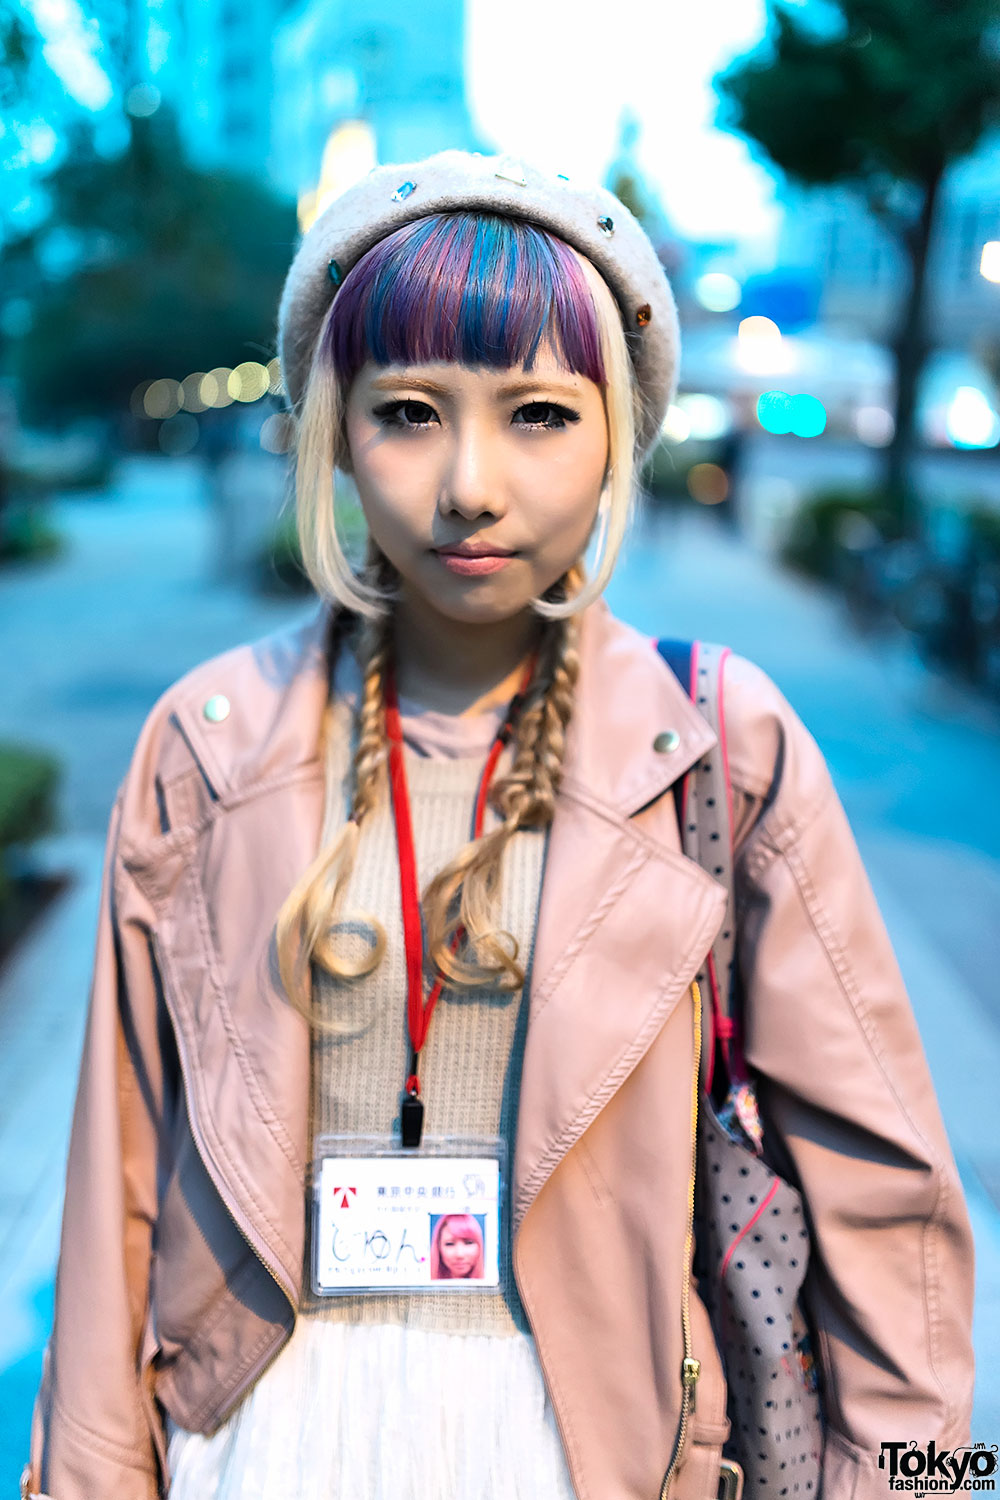 Colorful Bangs Hairstyle, Leather Jacket, Sheer Skirt & Button Bag ...